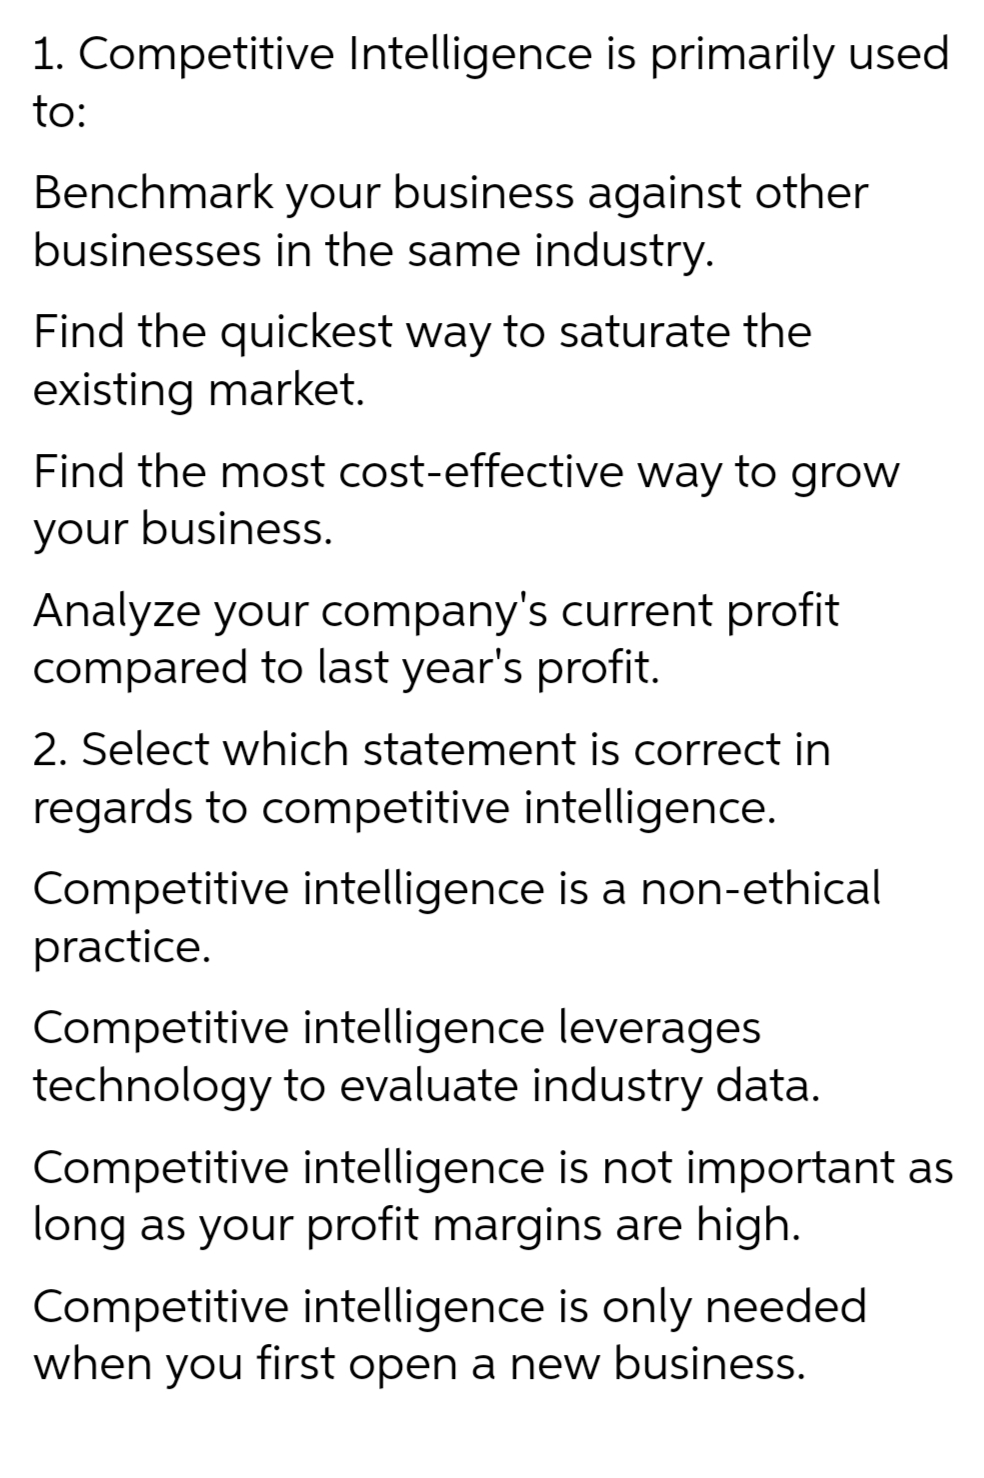 1. Competitive Intelligence is primarily used
to:
Benchmark your business against other
businesses in the same industry.
Find the quickest way to saturate the
existing market.
Find the most cost-effective way to grow
your business.
Analyze your company's current profit
compared to last year's profit.
2. Select which statement is correct in
regards to competitive intelligence.
Competitive intelligence is a non-ethical
practice.
Competitive intelligence leverages
technology to evaluate industry data.
Competitive intelligence is not important as
long as your profit margins are high.
Competitive intelligence is only needed
when you first open a new business.
